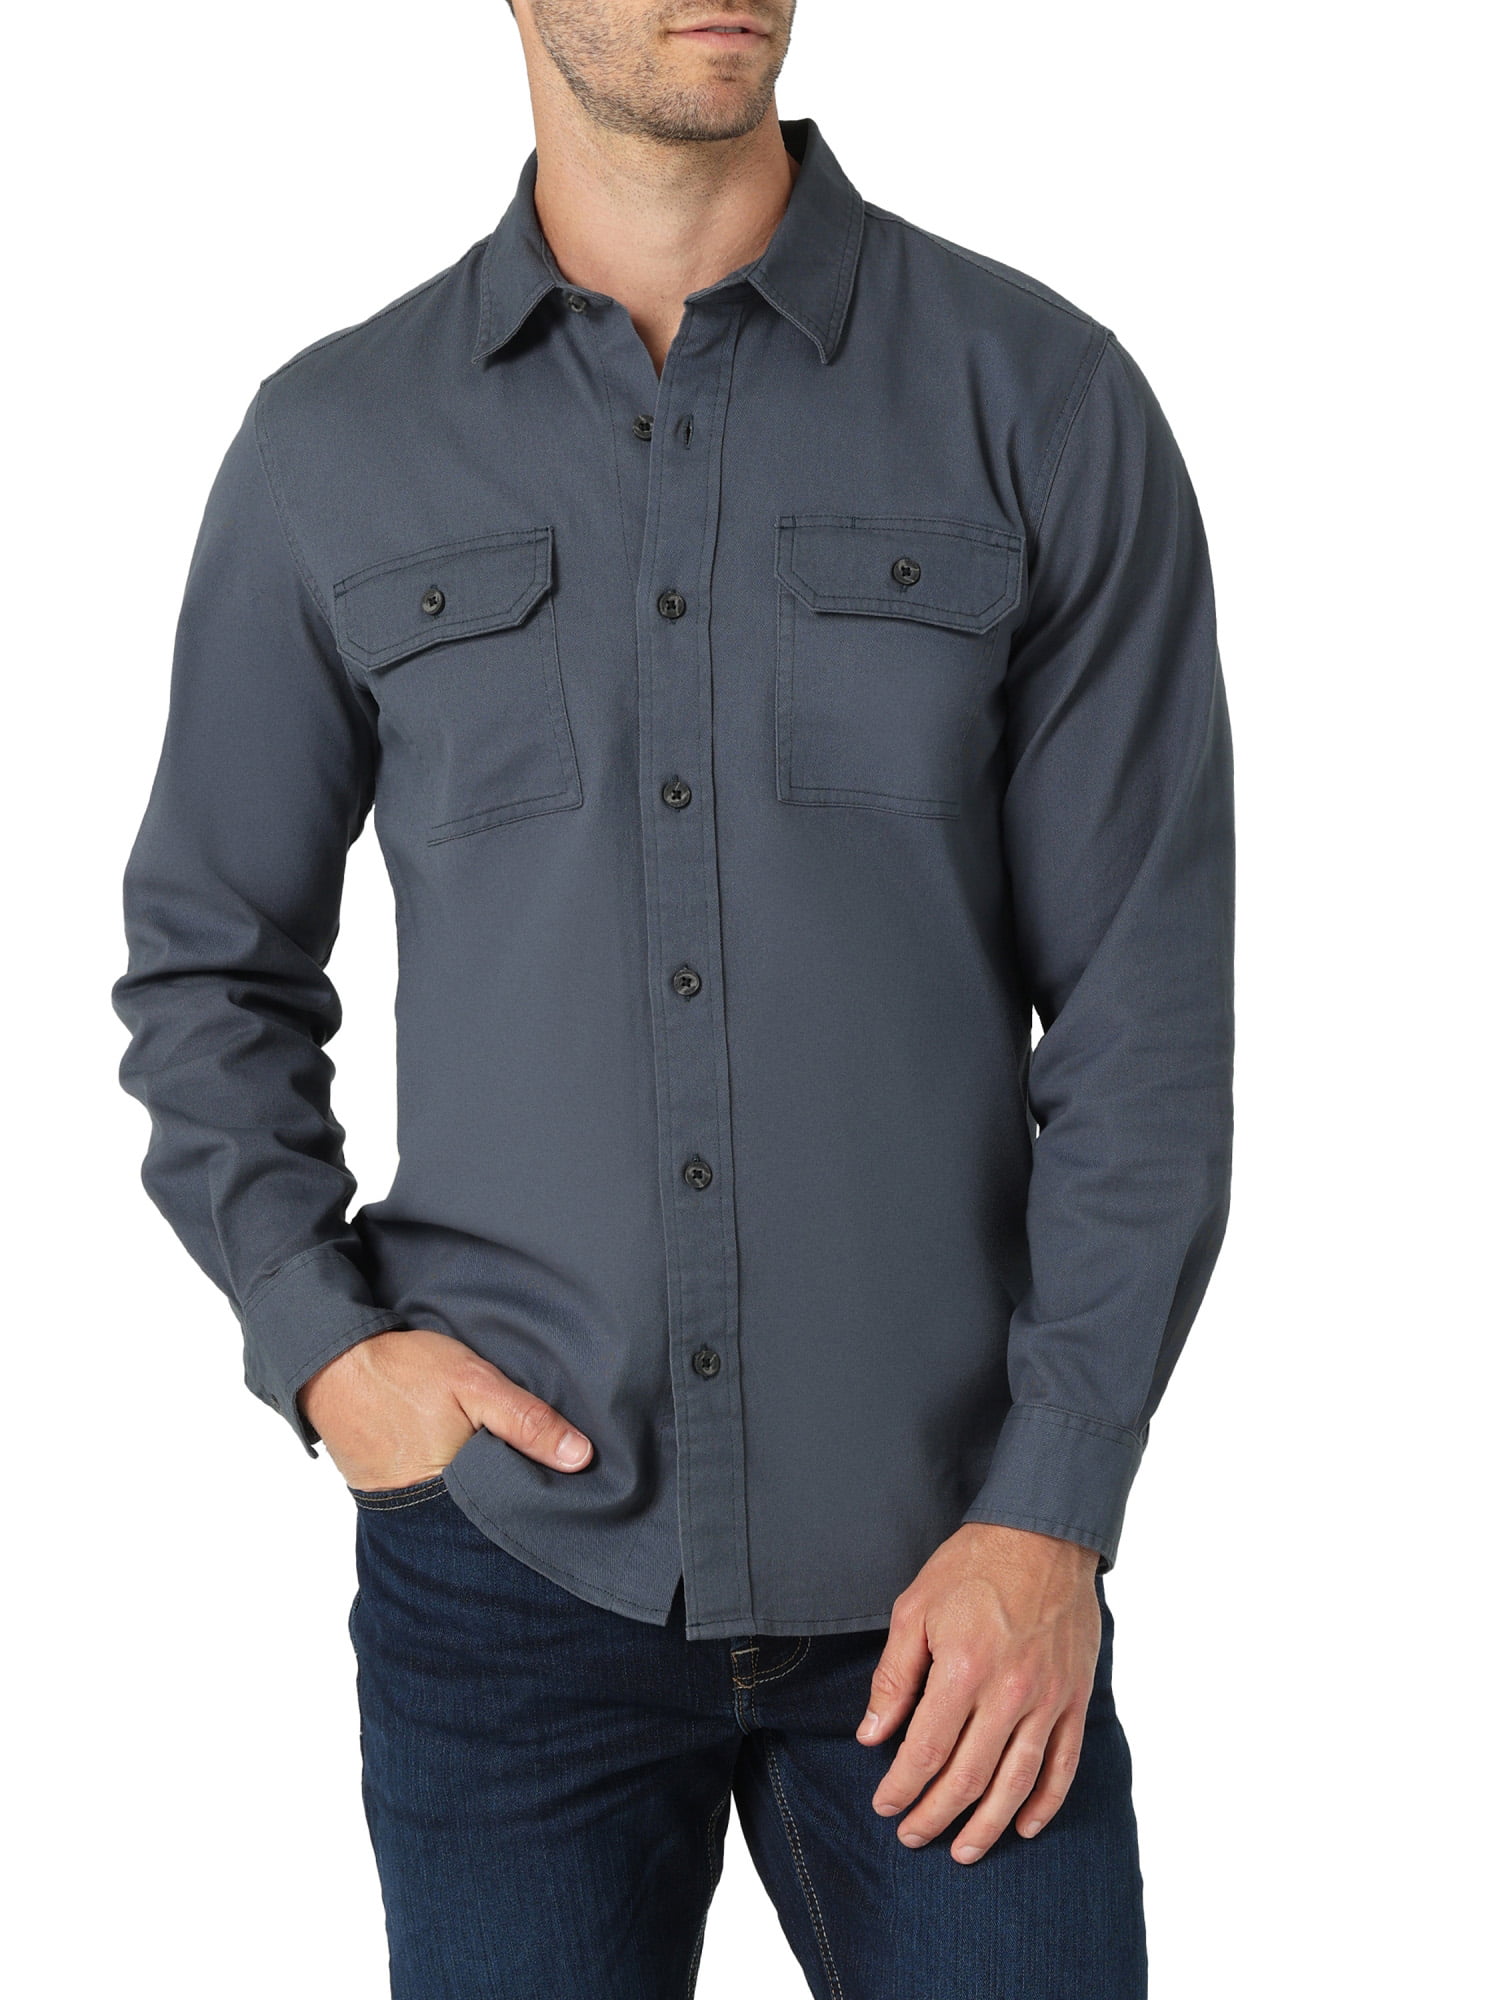 Wrangler Men's Long Sleeve Epic Soft Woven Shirt (Color: Ombre Blue or Teak Heather, Sizes S-XL) $11 + Free S&H w/ Walmart+ or $35+